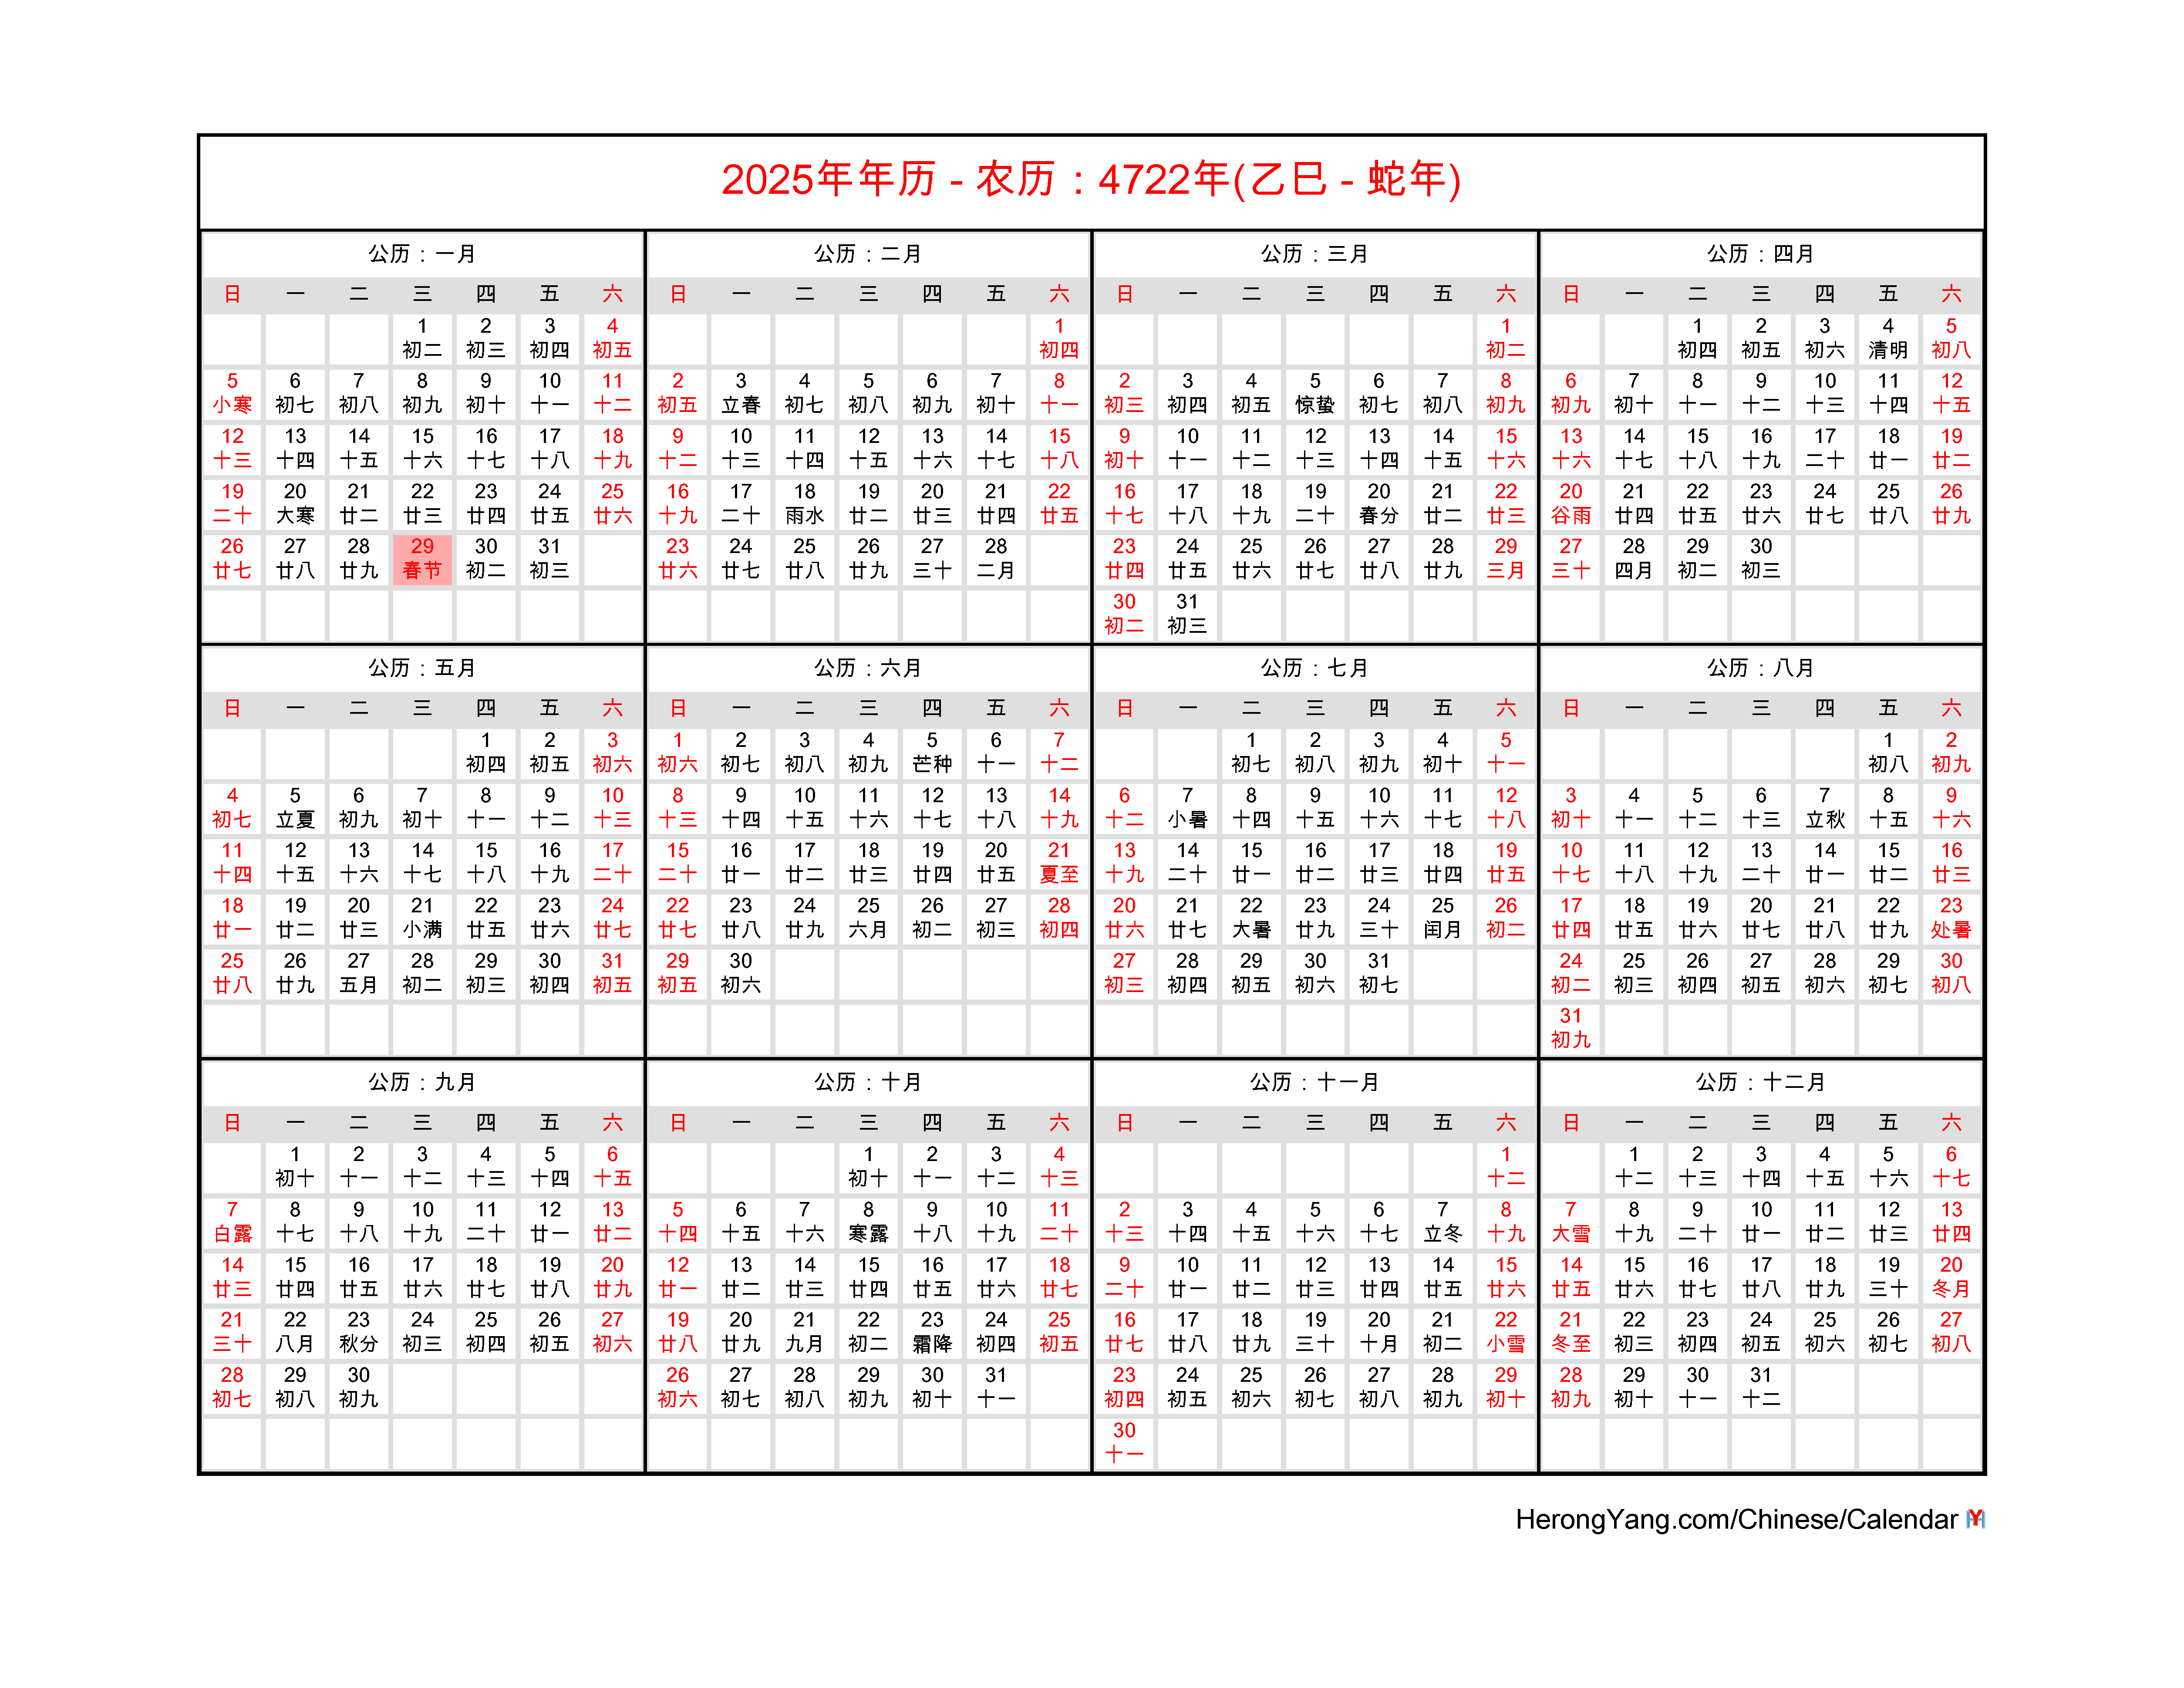 Free Chinese Calendar 2025 - Year of the Snake